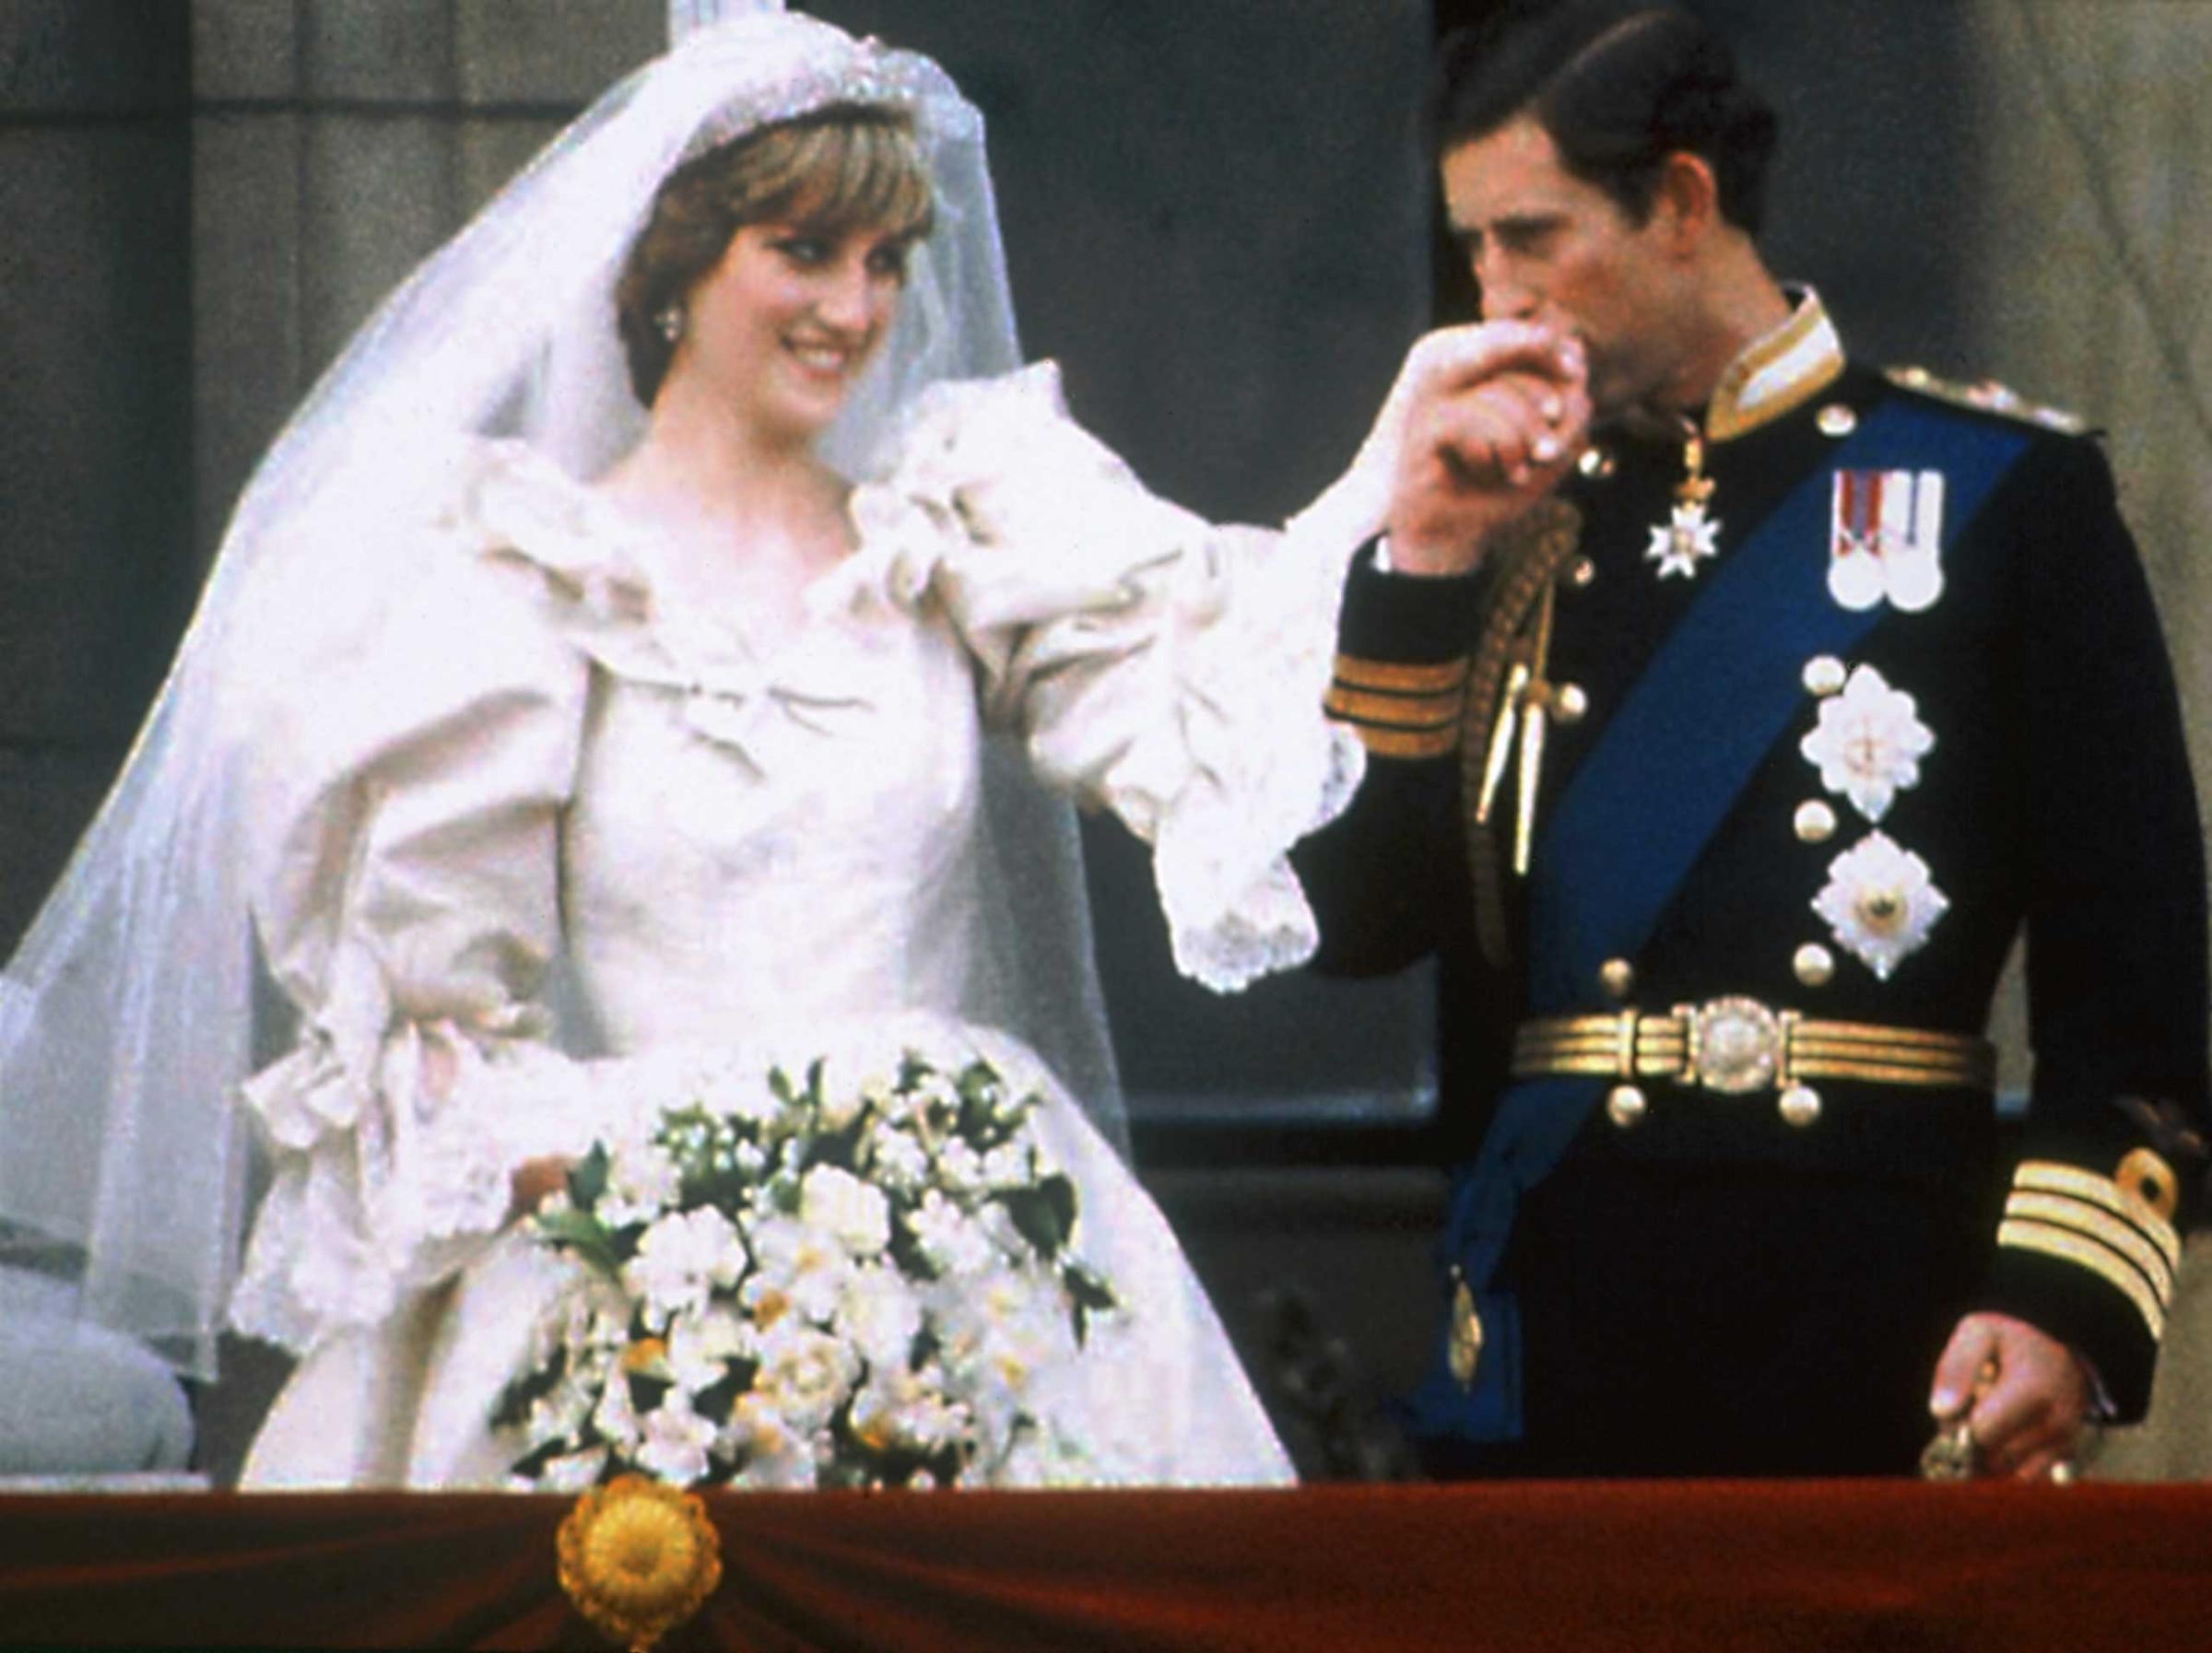 Charles, Prince of Wales, and Lady Diana Spencer on their wedding day at St Paul's Cathedral, London on July 29, 1981.